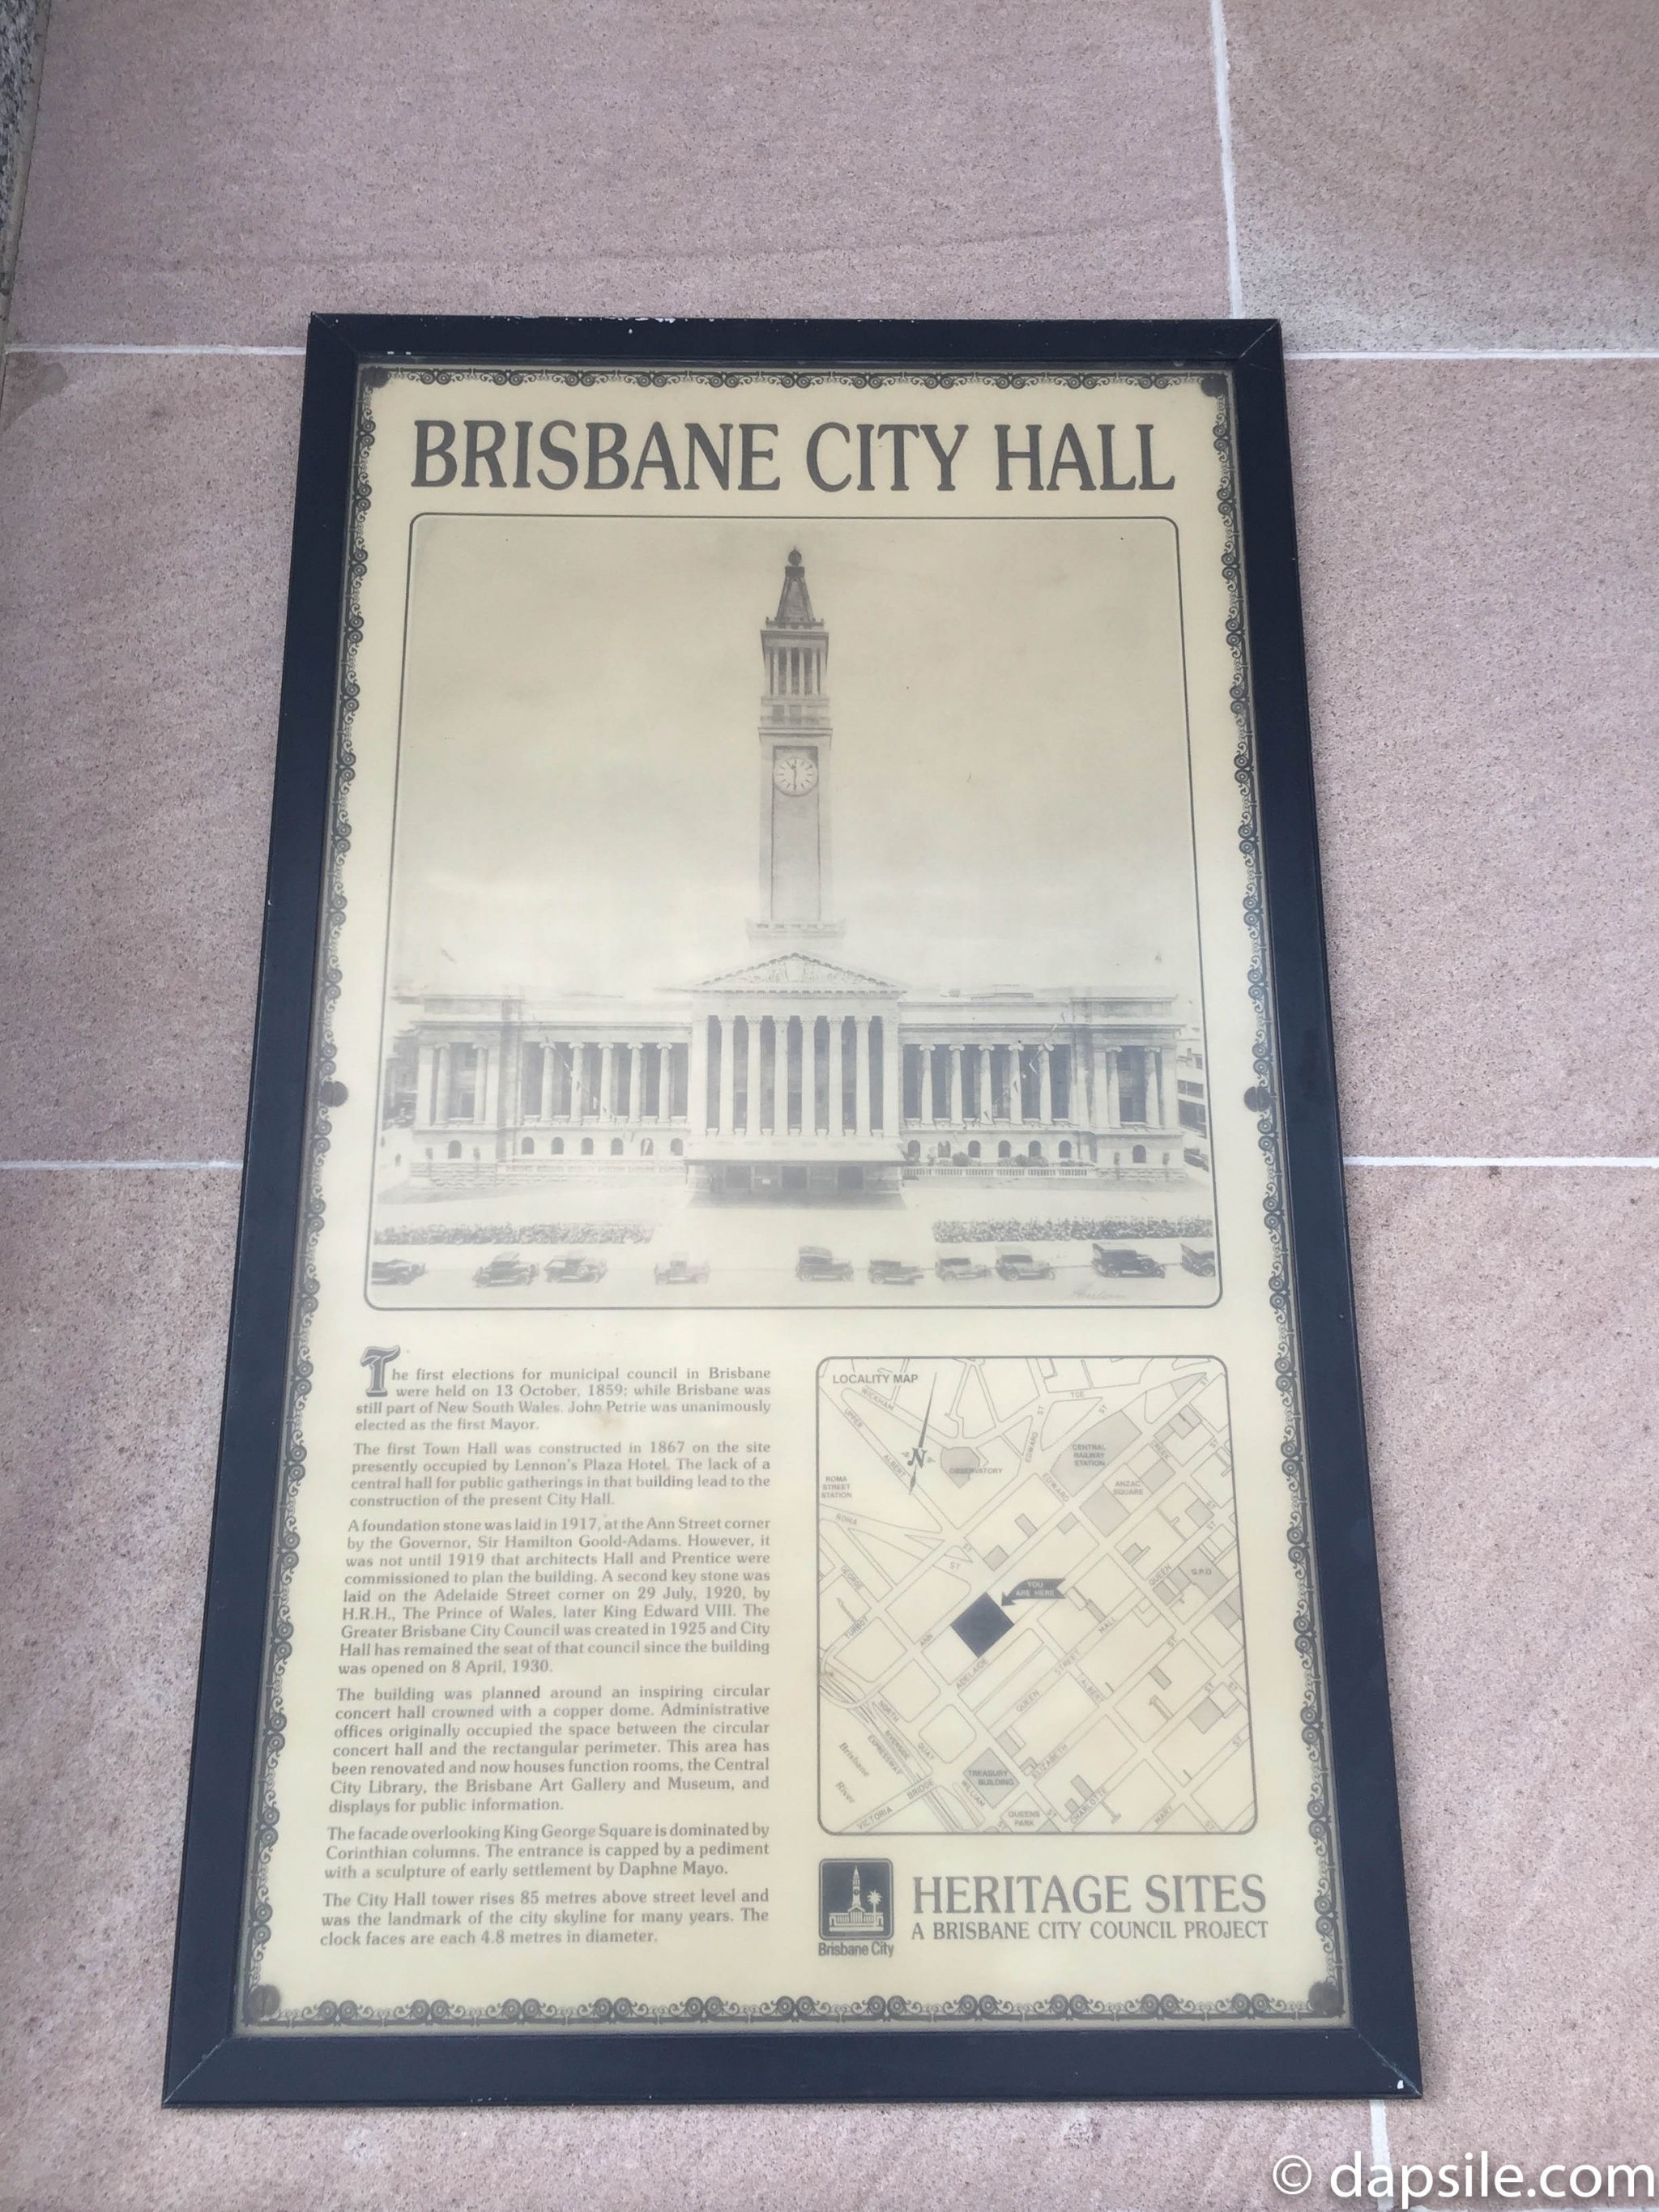 Brisbane City Hall Sign with history